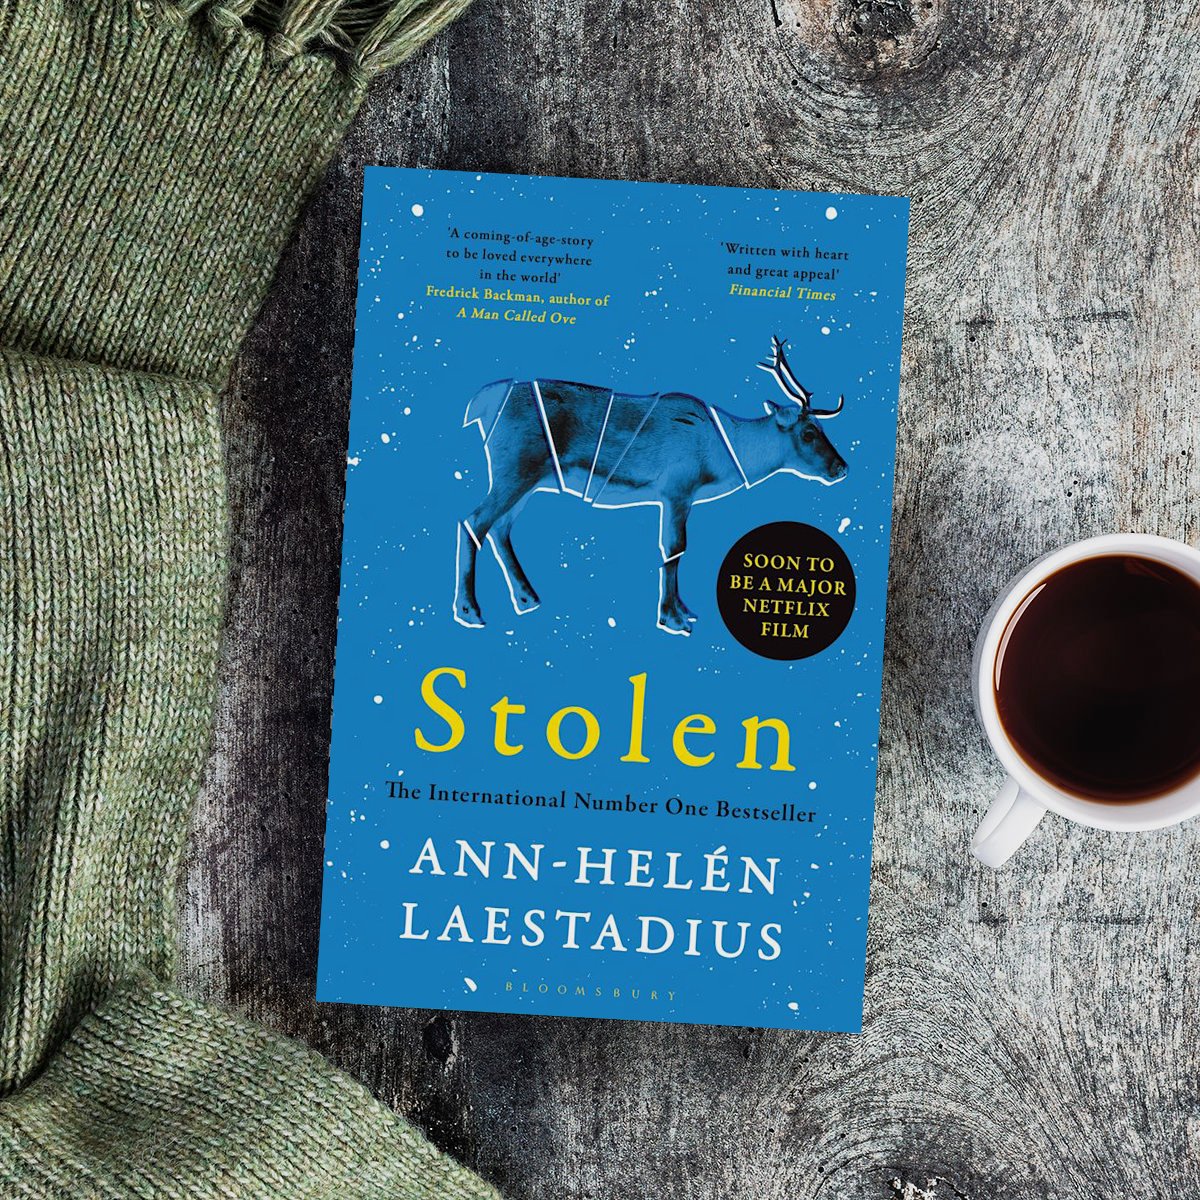 🌨️ 'A coming-of-age-story to be loved everywhere in the world' FREDRIK BACKMAN The international sensation and Netflix adaptation, Stolen is the story of a young Sámi girl's coming-of-age, and a powerful fable about family, identity and justice.